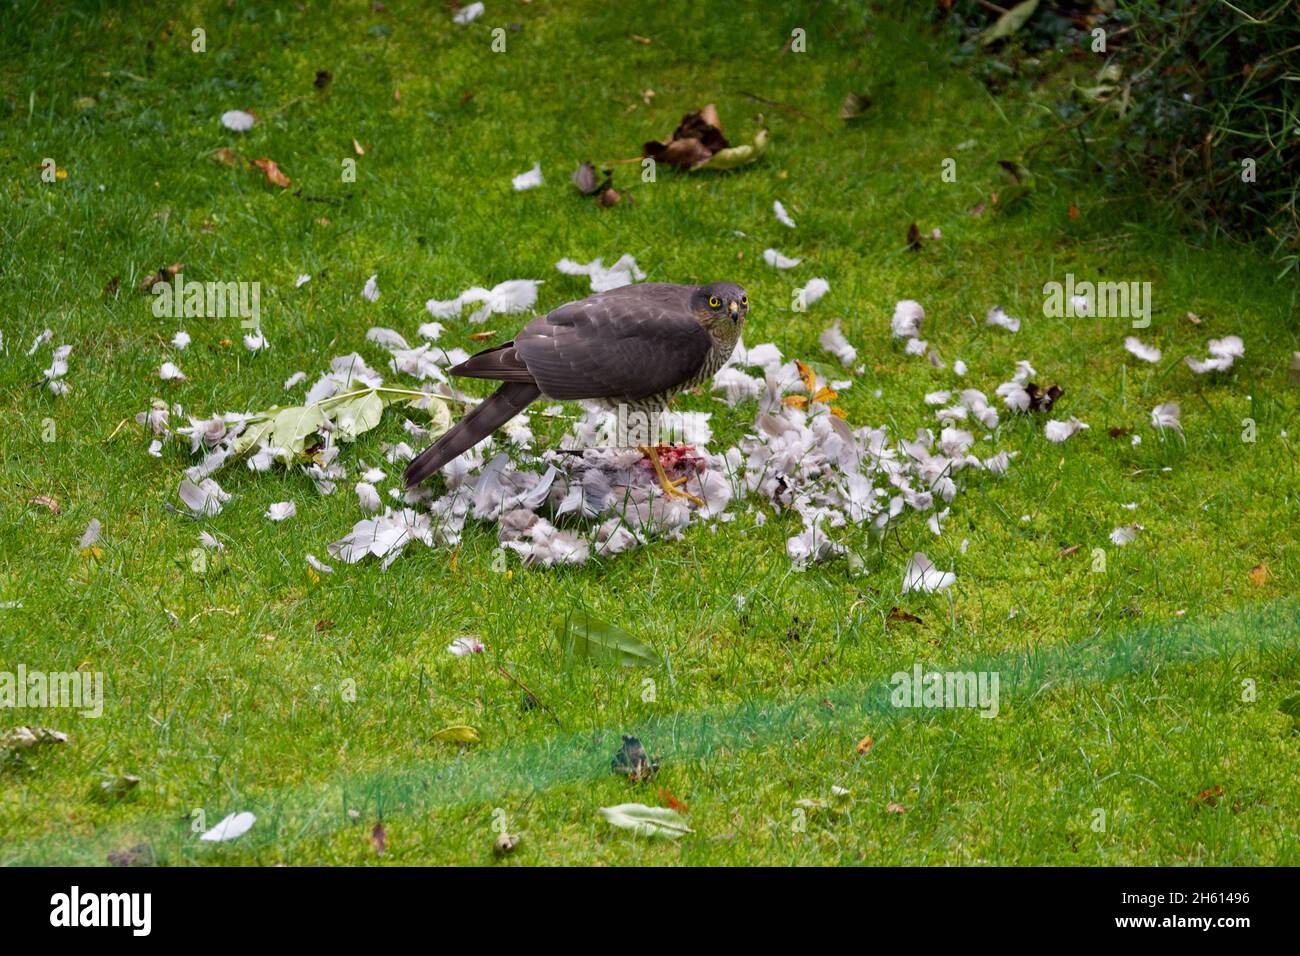 Sparrowhawk sat on top of a dead pigeon, surrounded by feathers.  Sparrowhawk (Accipiter nisus) eating a Wood Pigeon (Columba palumbus). Stock Photo